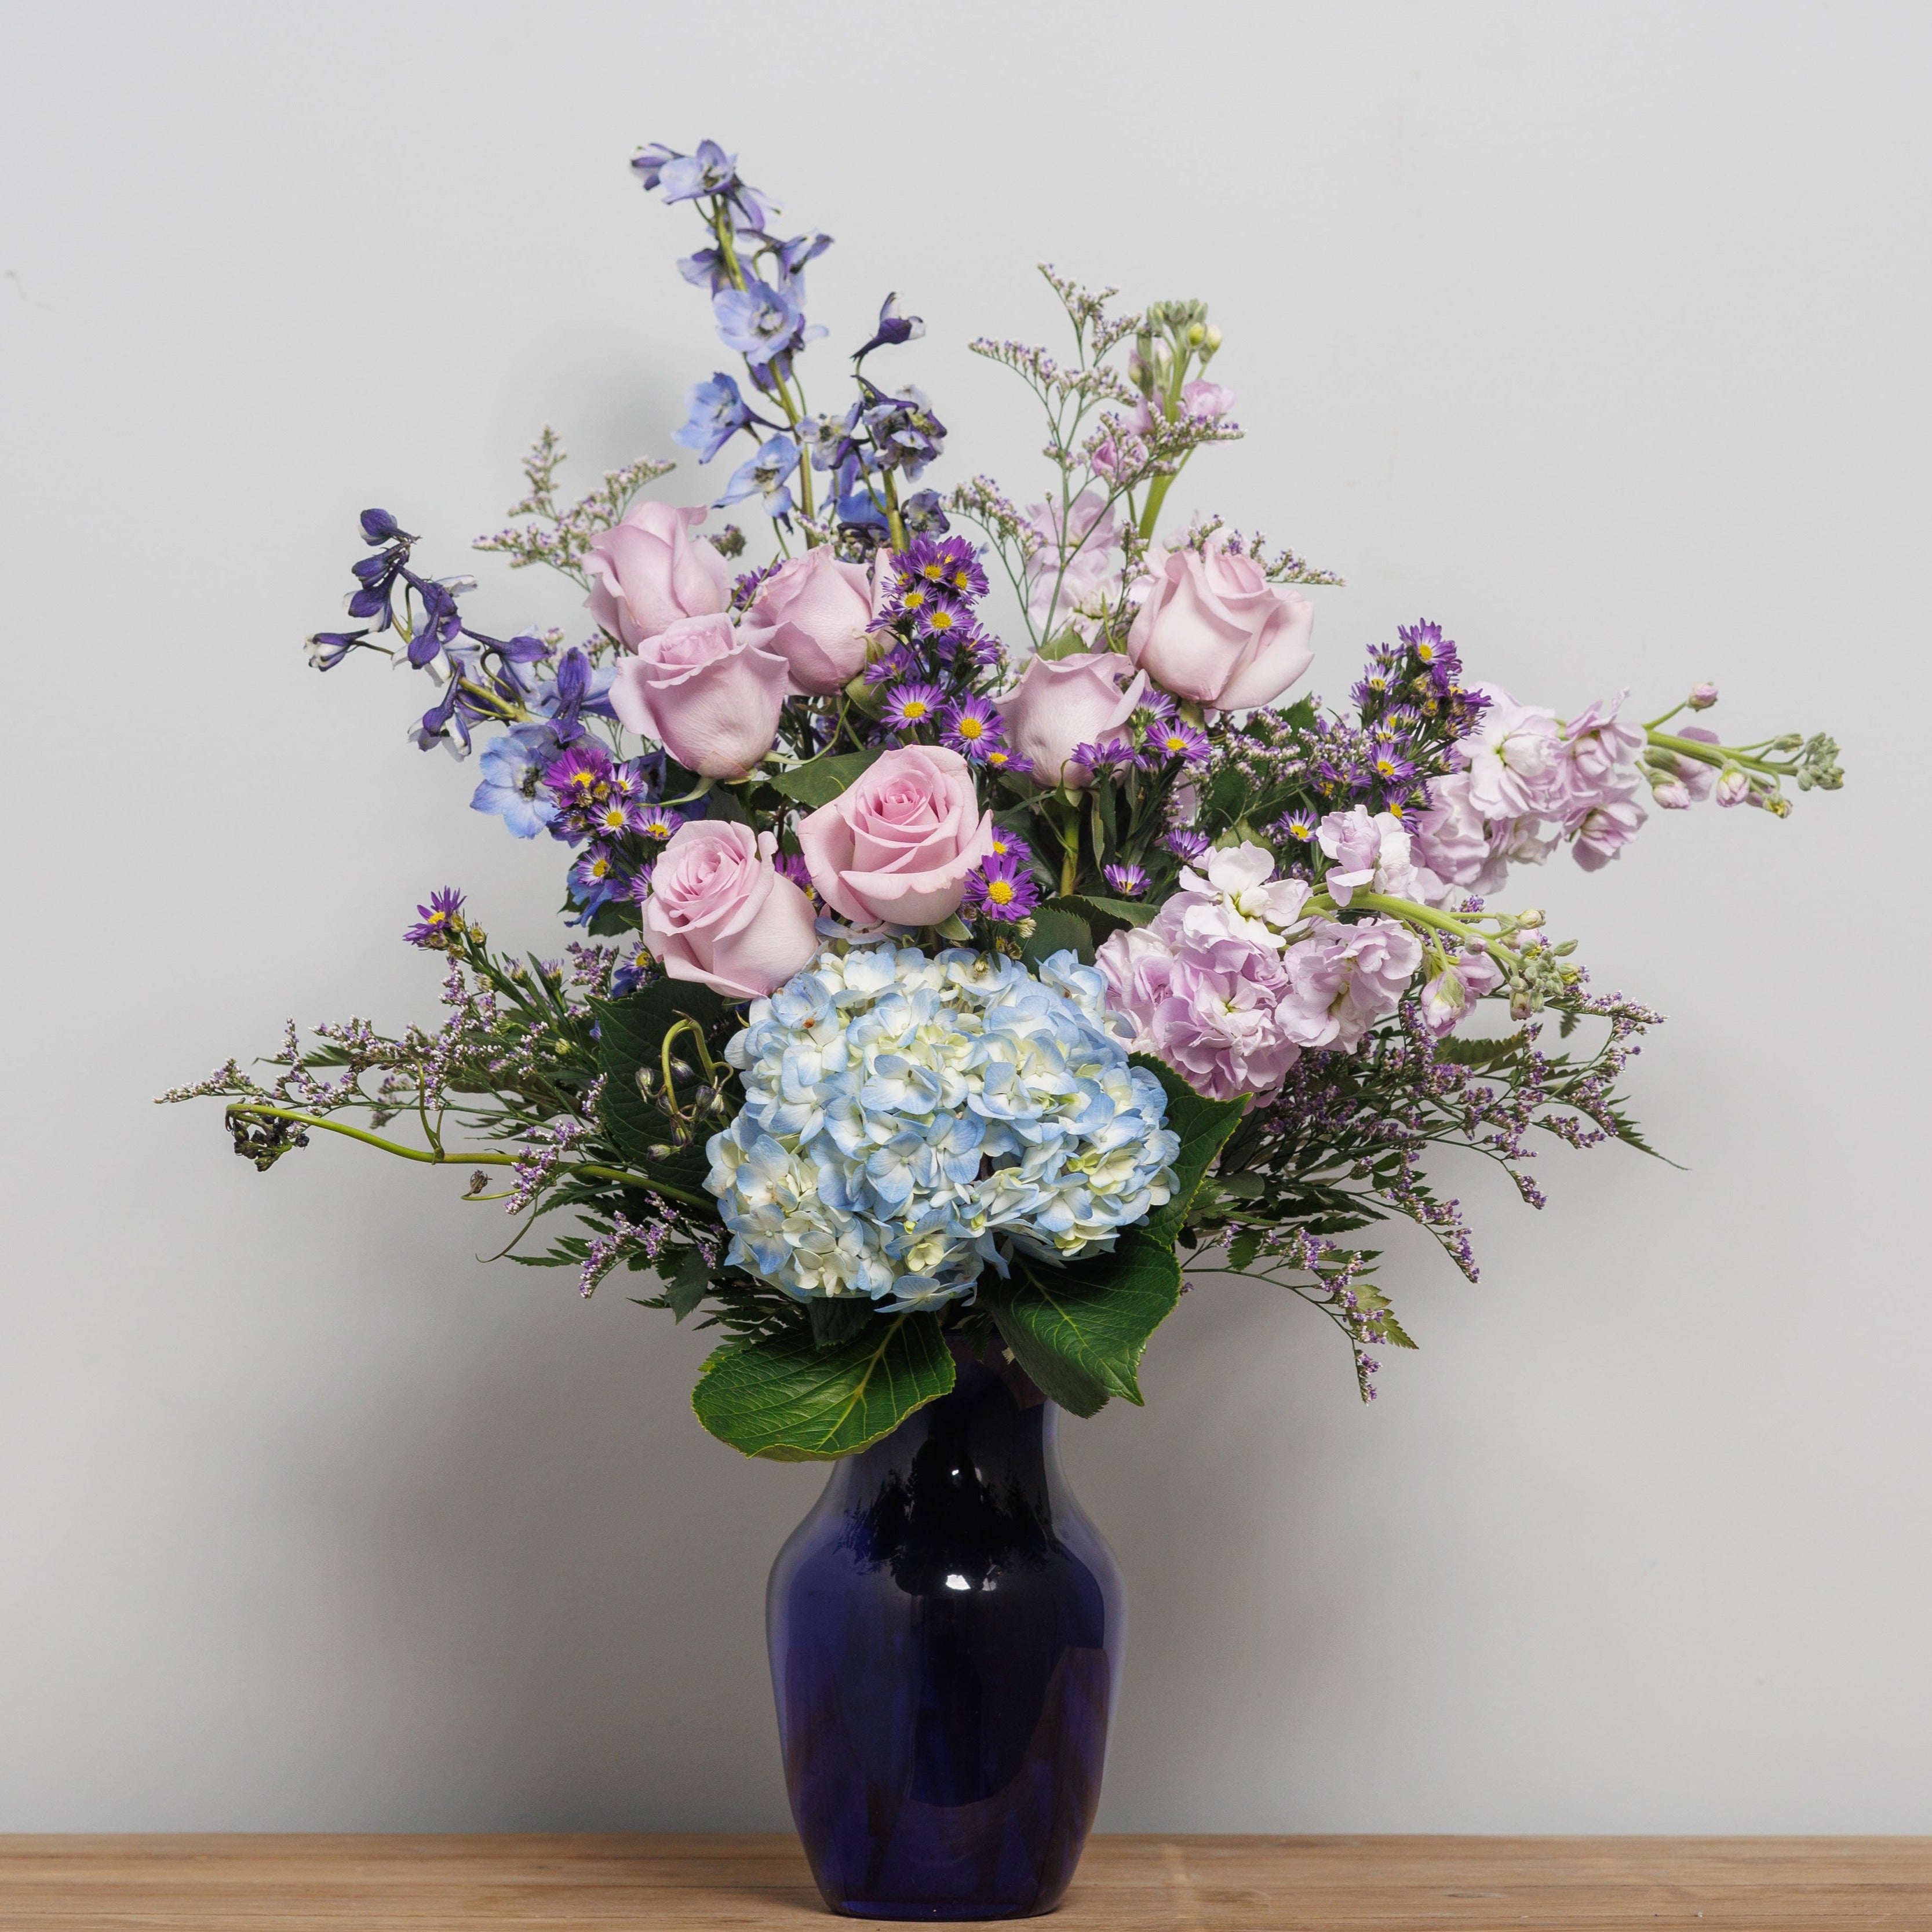 A flower arrangement with blue and purple flowers in a blue vase.